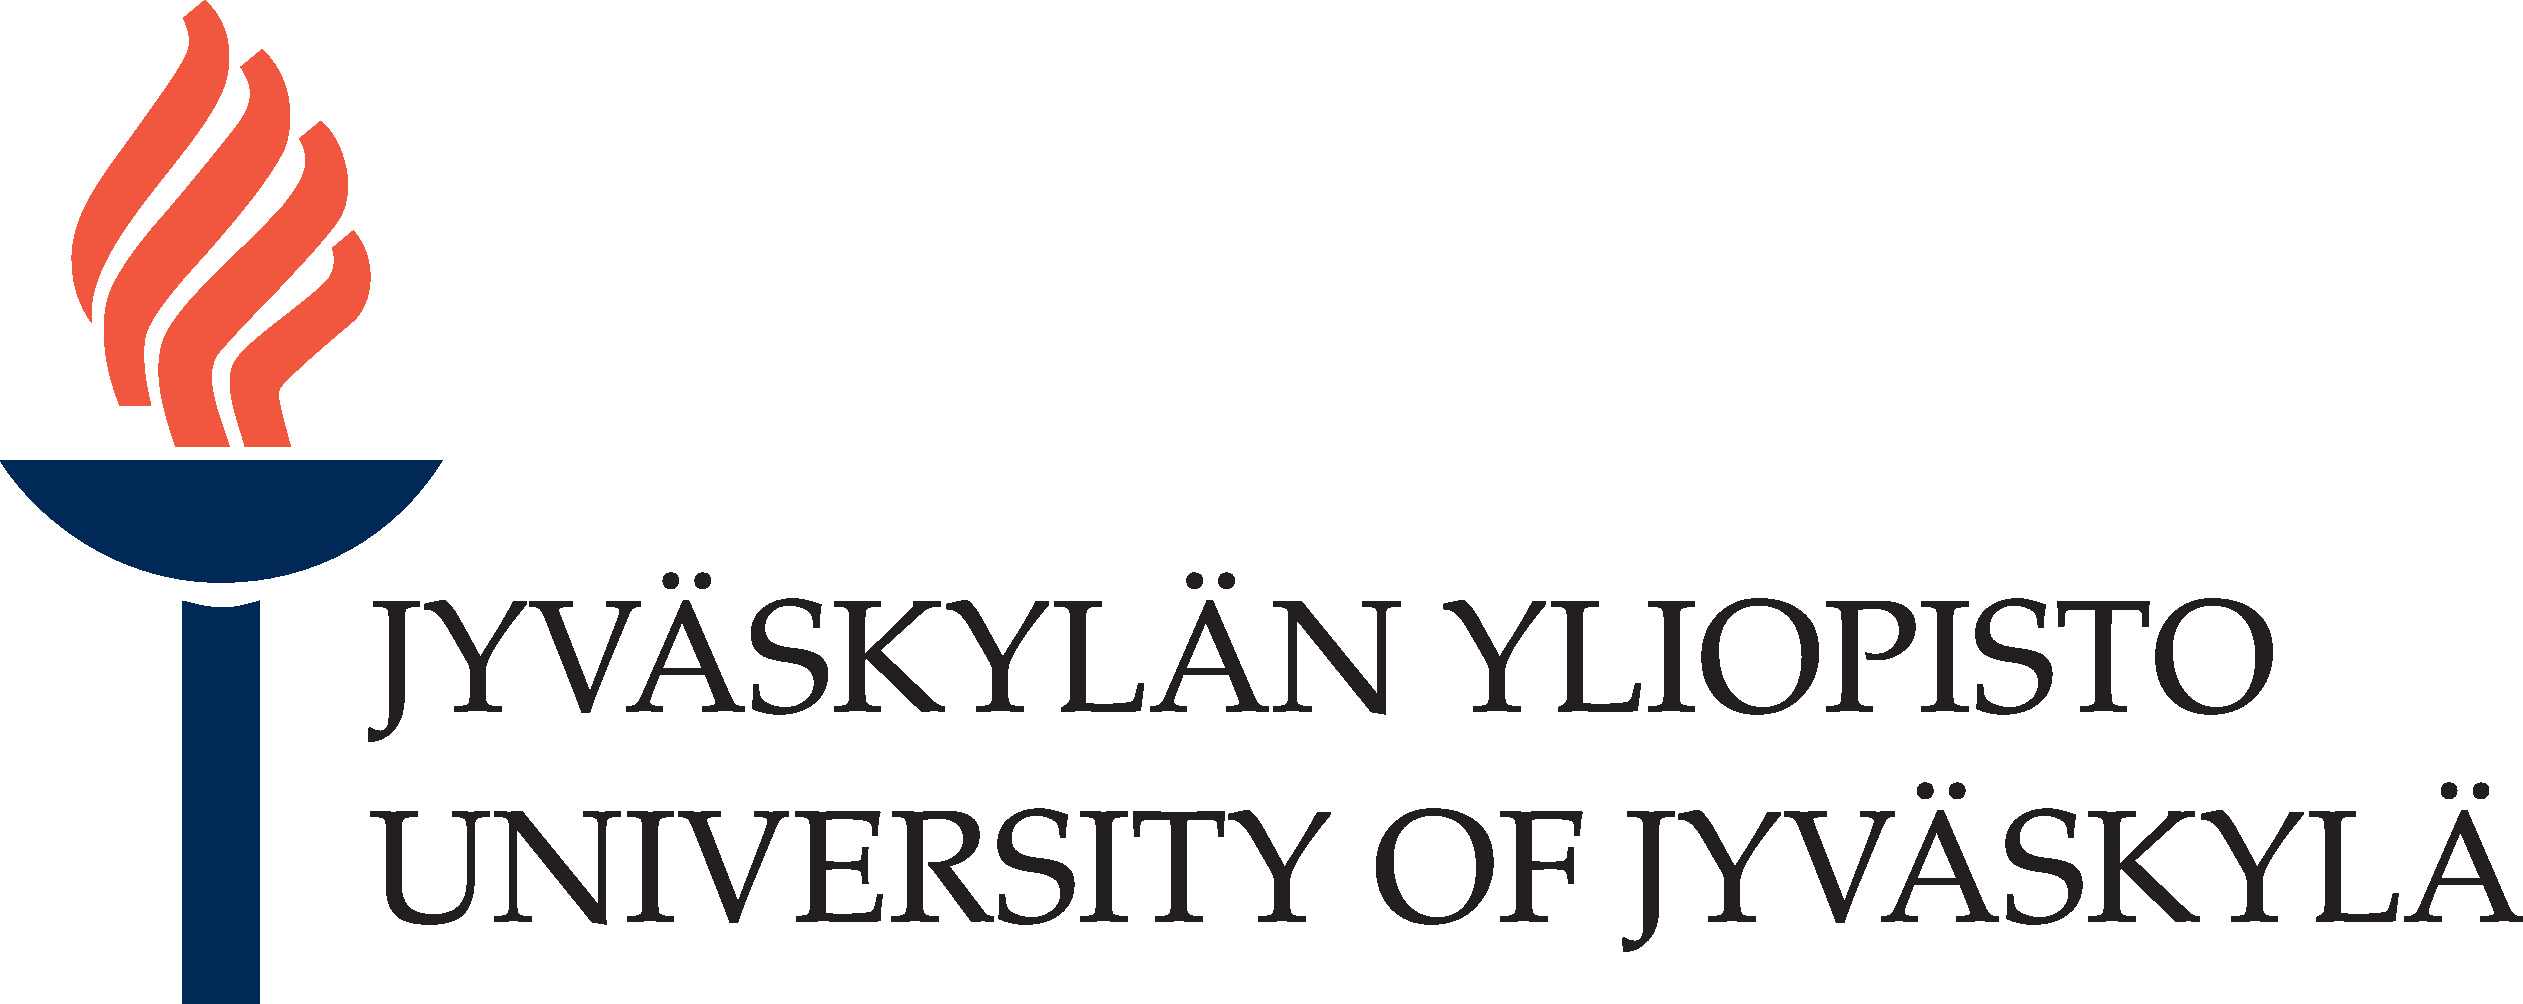 University of Jyväskylä uses Spinbase, AI-based search engine, to find EU funding calls, EU projects and EU partners for their research and innovation.